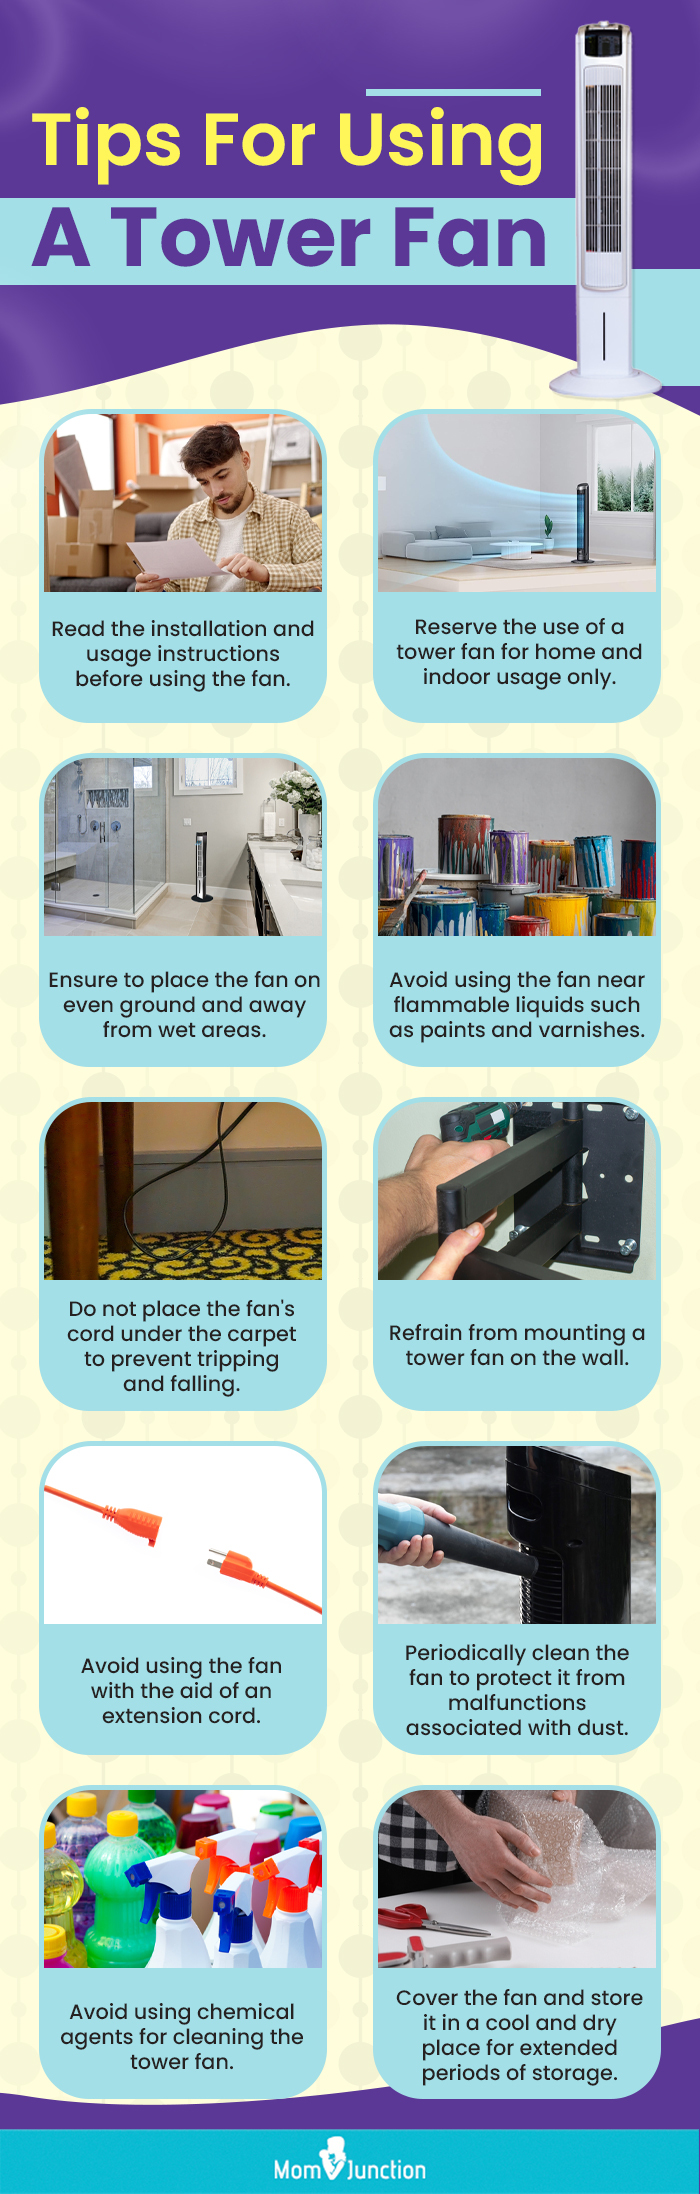 Tips For Using A Tower Fan (infographic)